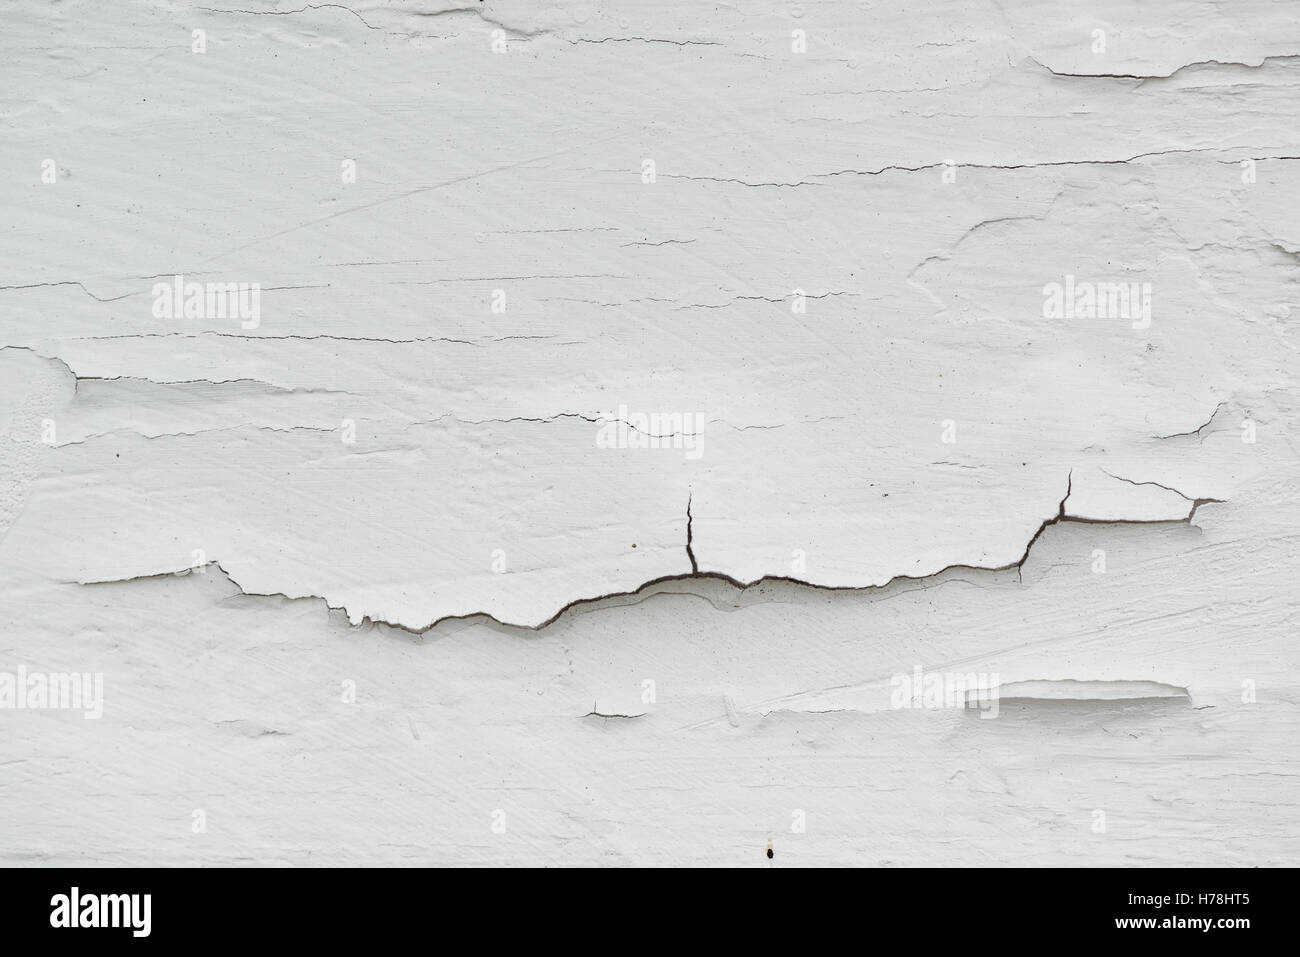 Cracked white paint on plank surface, abstract wooden background Stock Photo